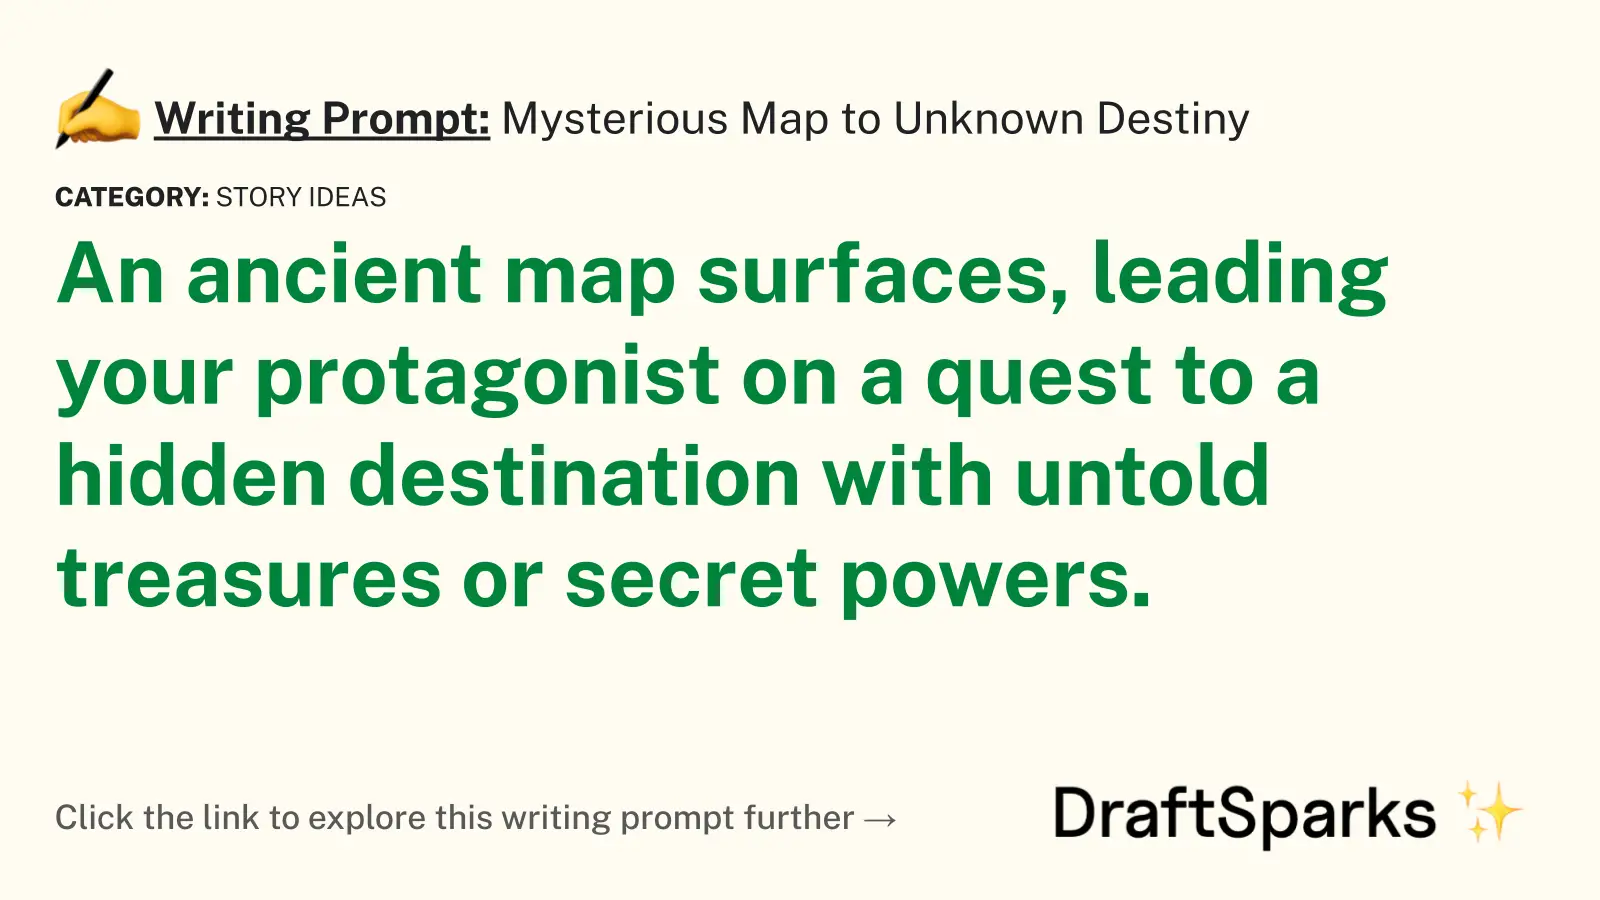 Mysterious Map to Unknown Destiny